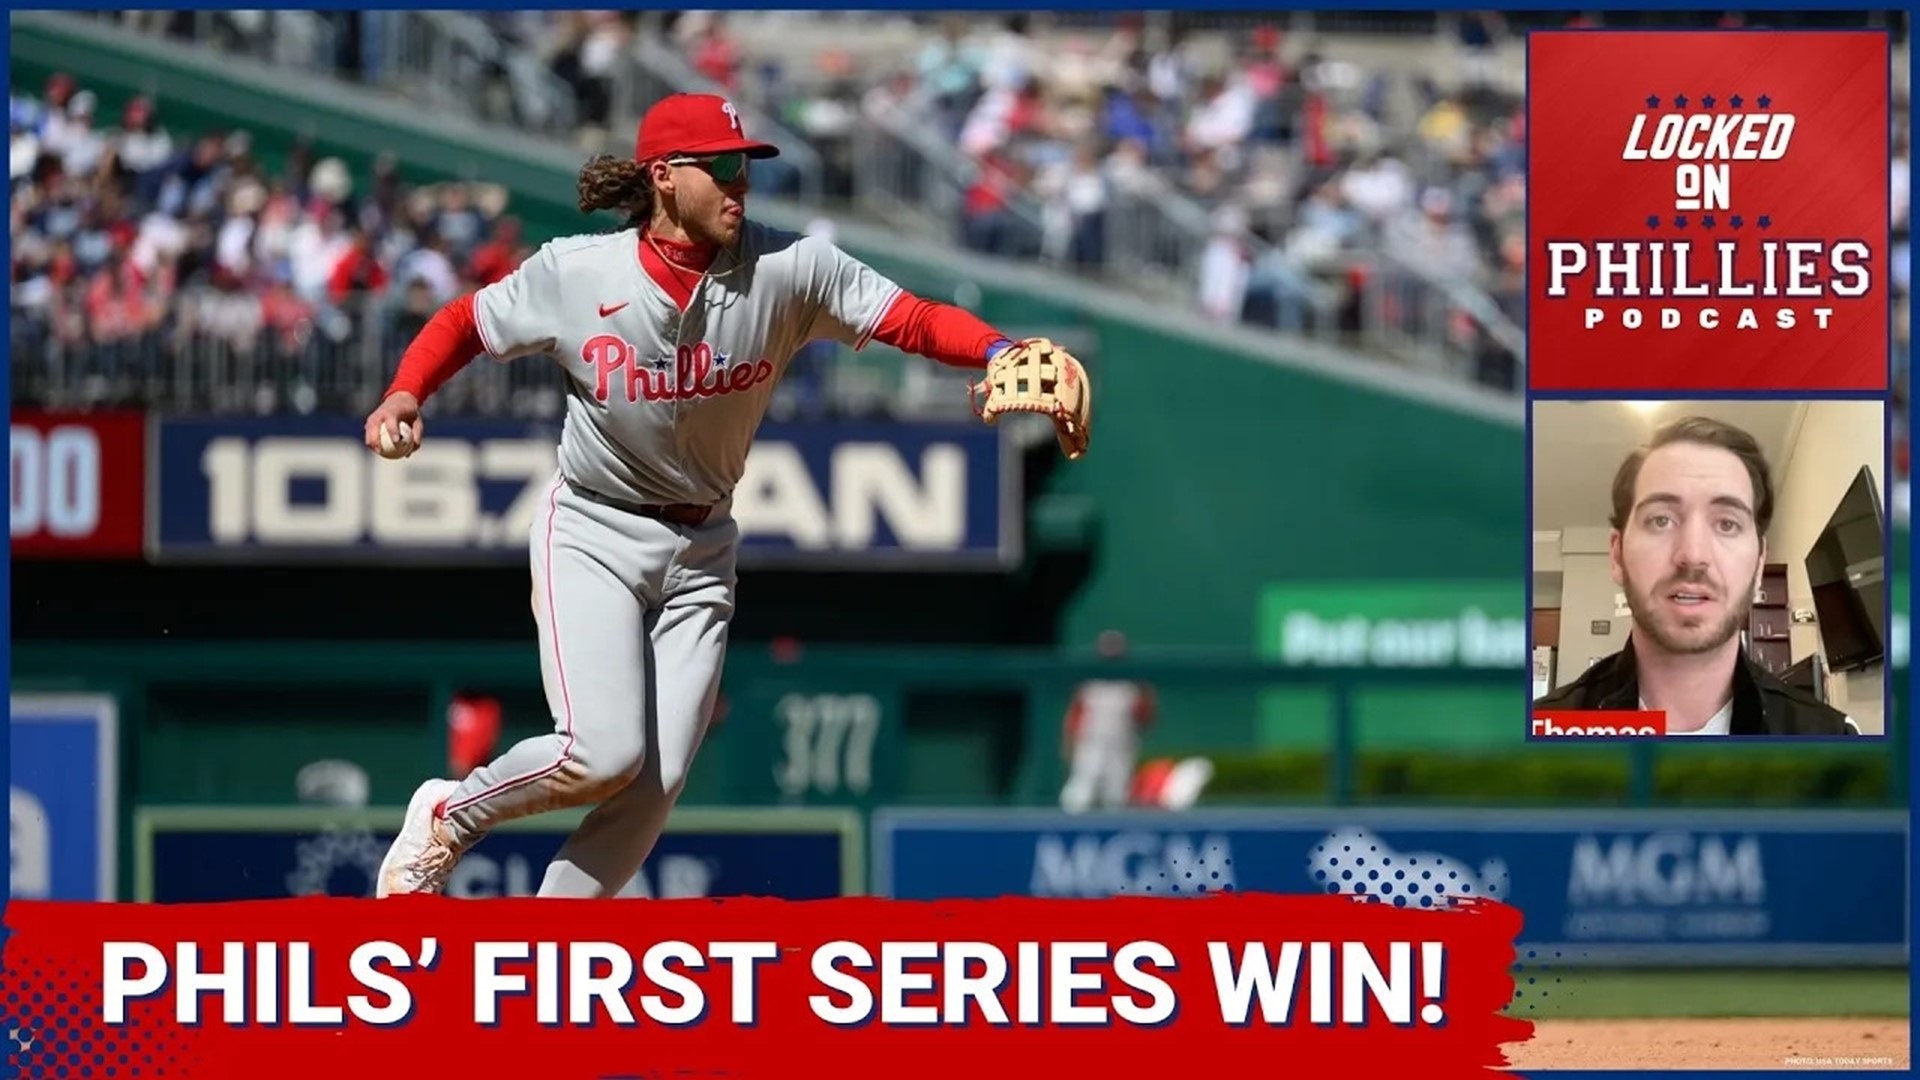 In today's episode, Connor reacts to the weekend series win by the Philadelphia Phillies over the Washington Nationals!